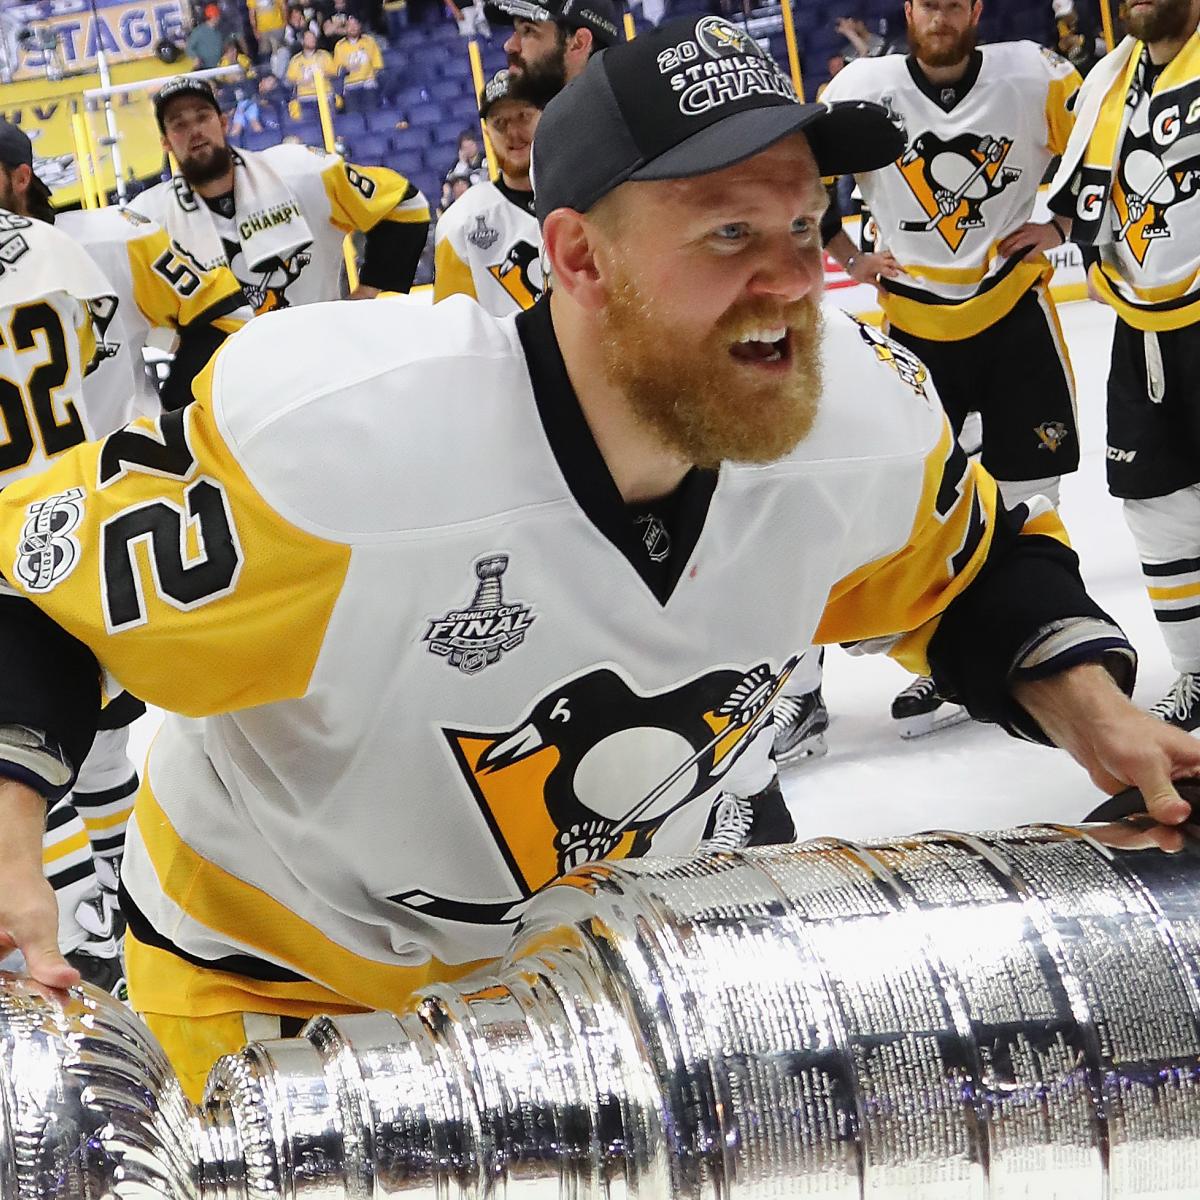 Crosby, Pens cap amazing year with second straight Stanley Cup